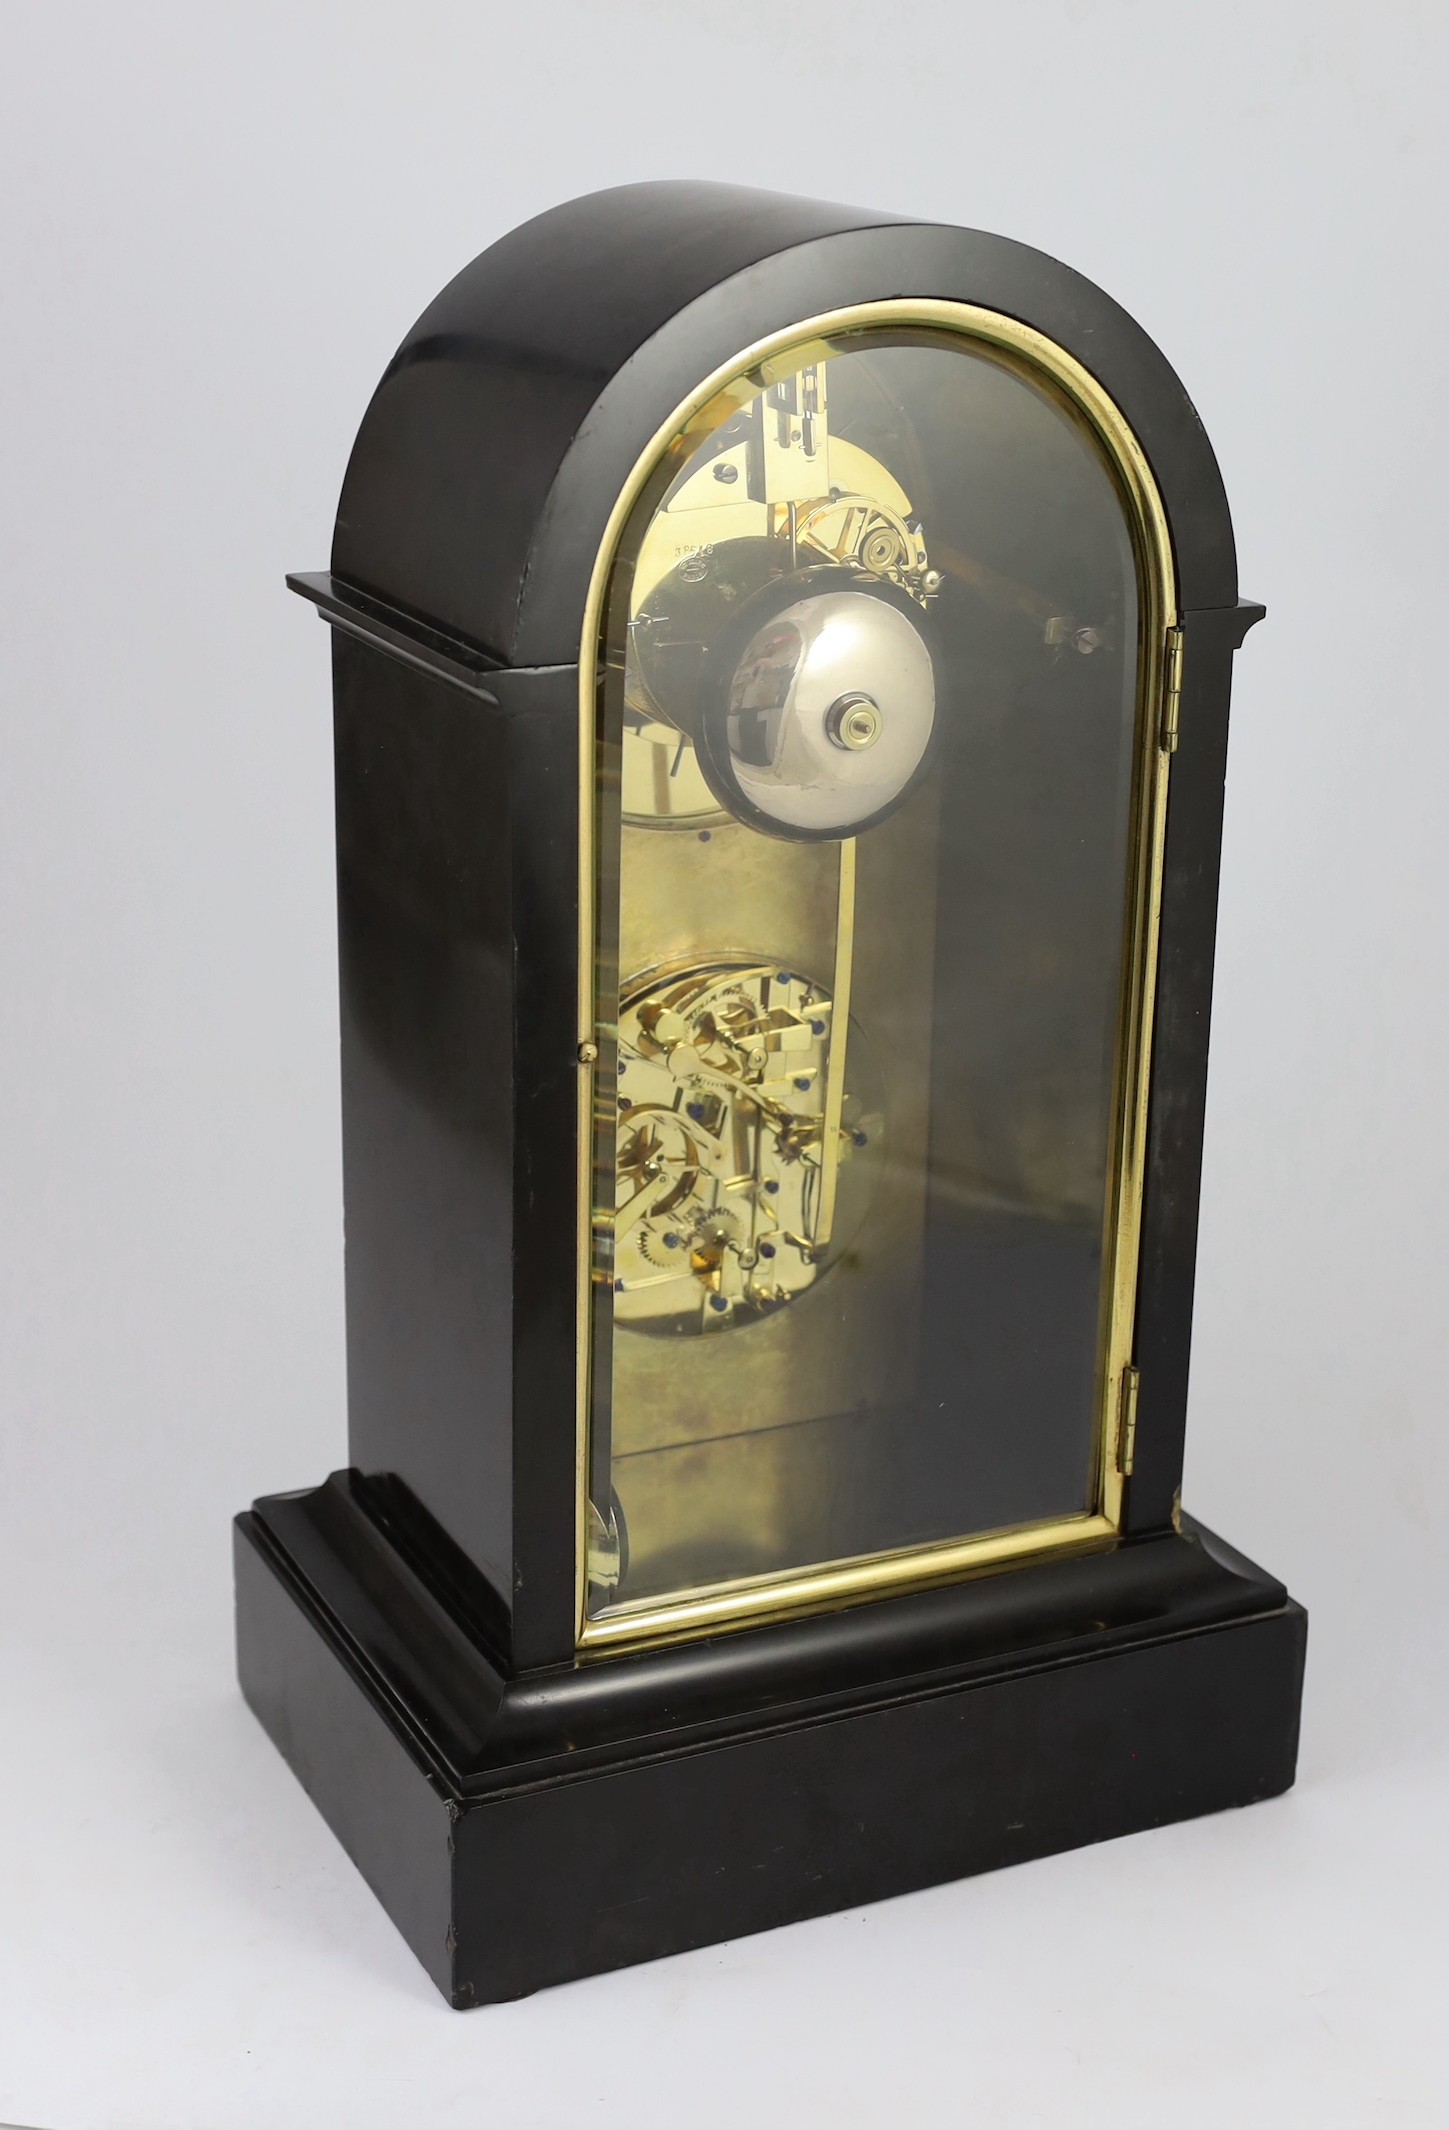 Henri Marc, Paris. A 19th century French arched top black marble mantel clock with perpetual - Image 3 of 6